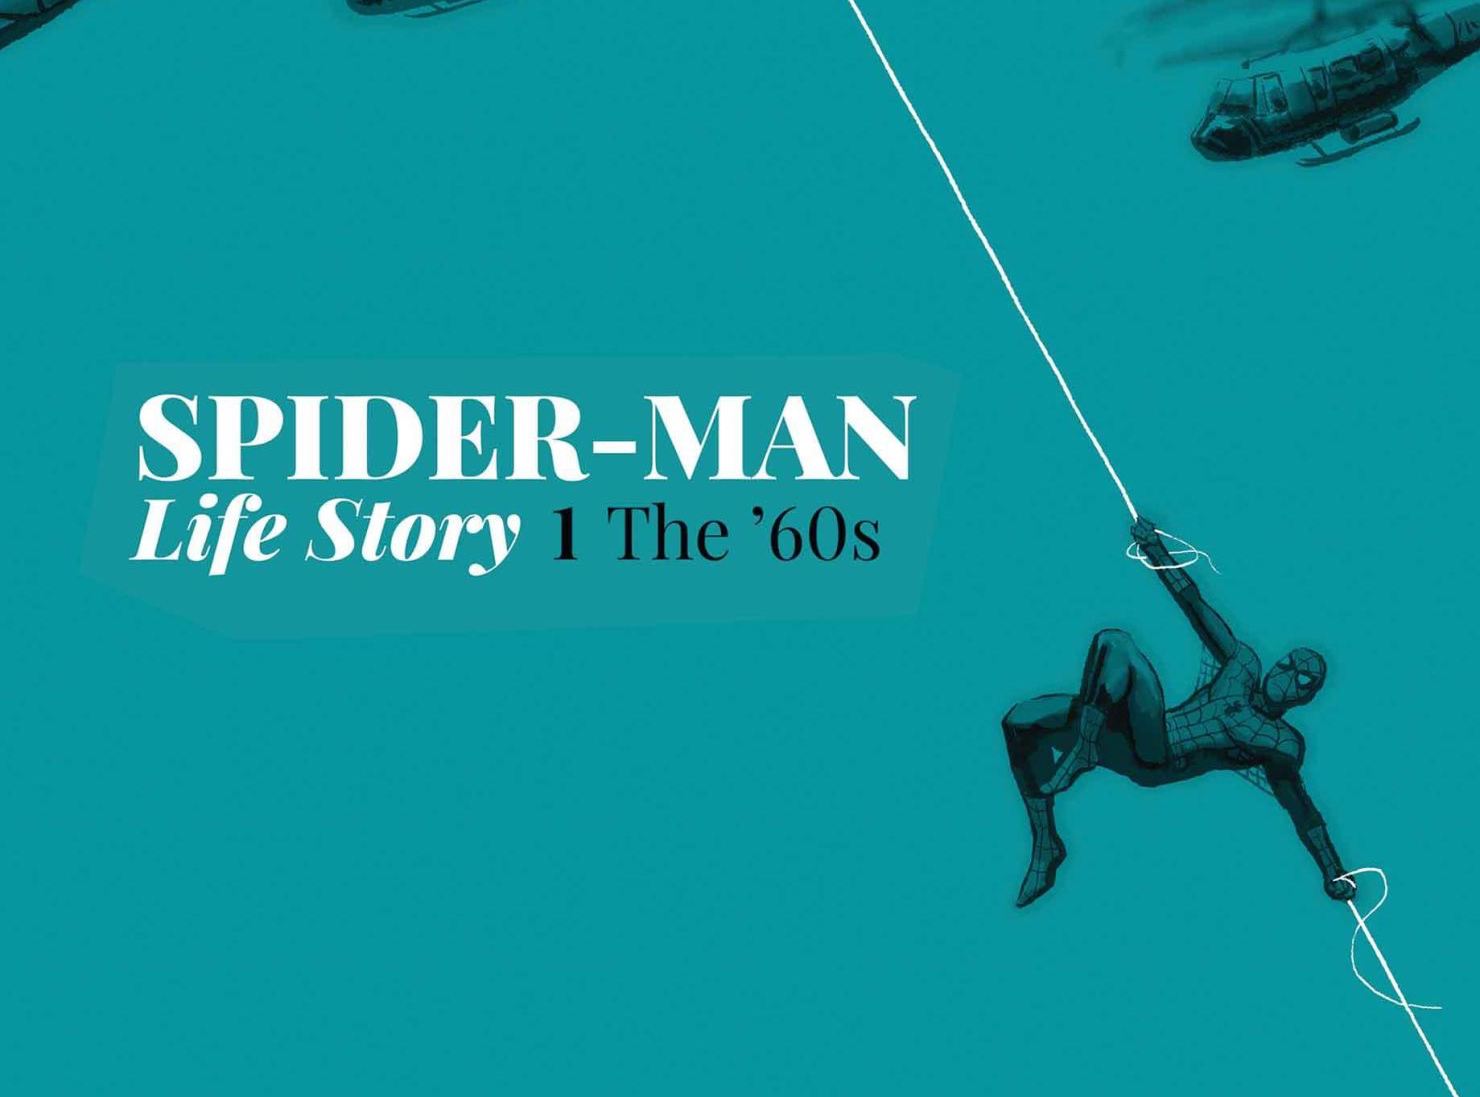 Spider-Man: Life Story #1 Review: A celebration of Spidey and the era of his creation